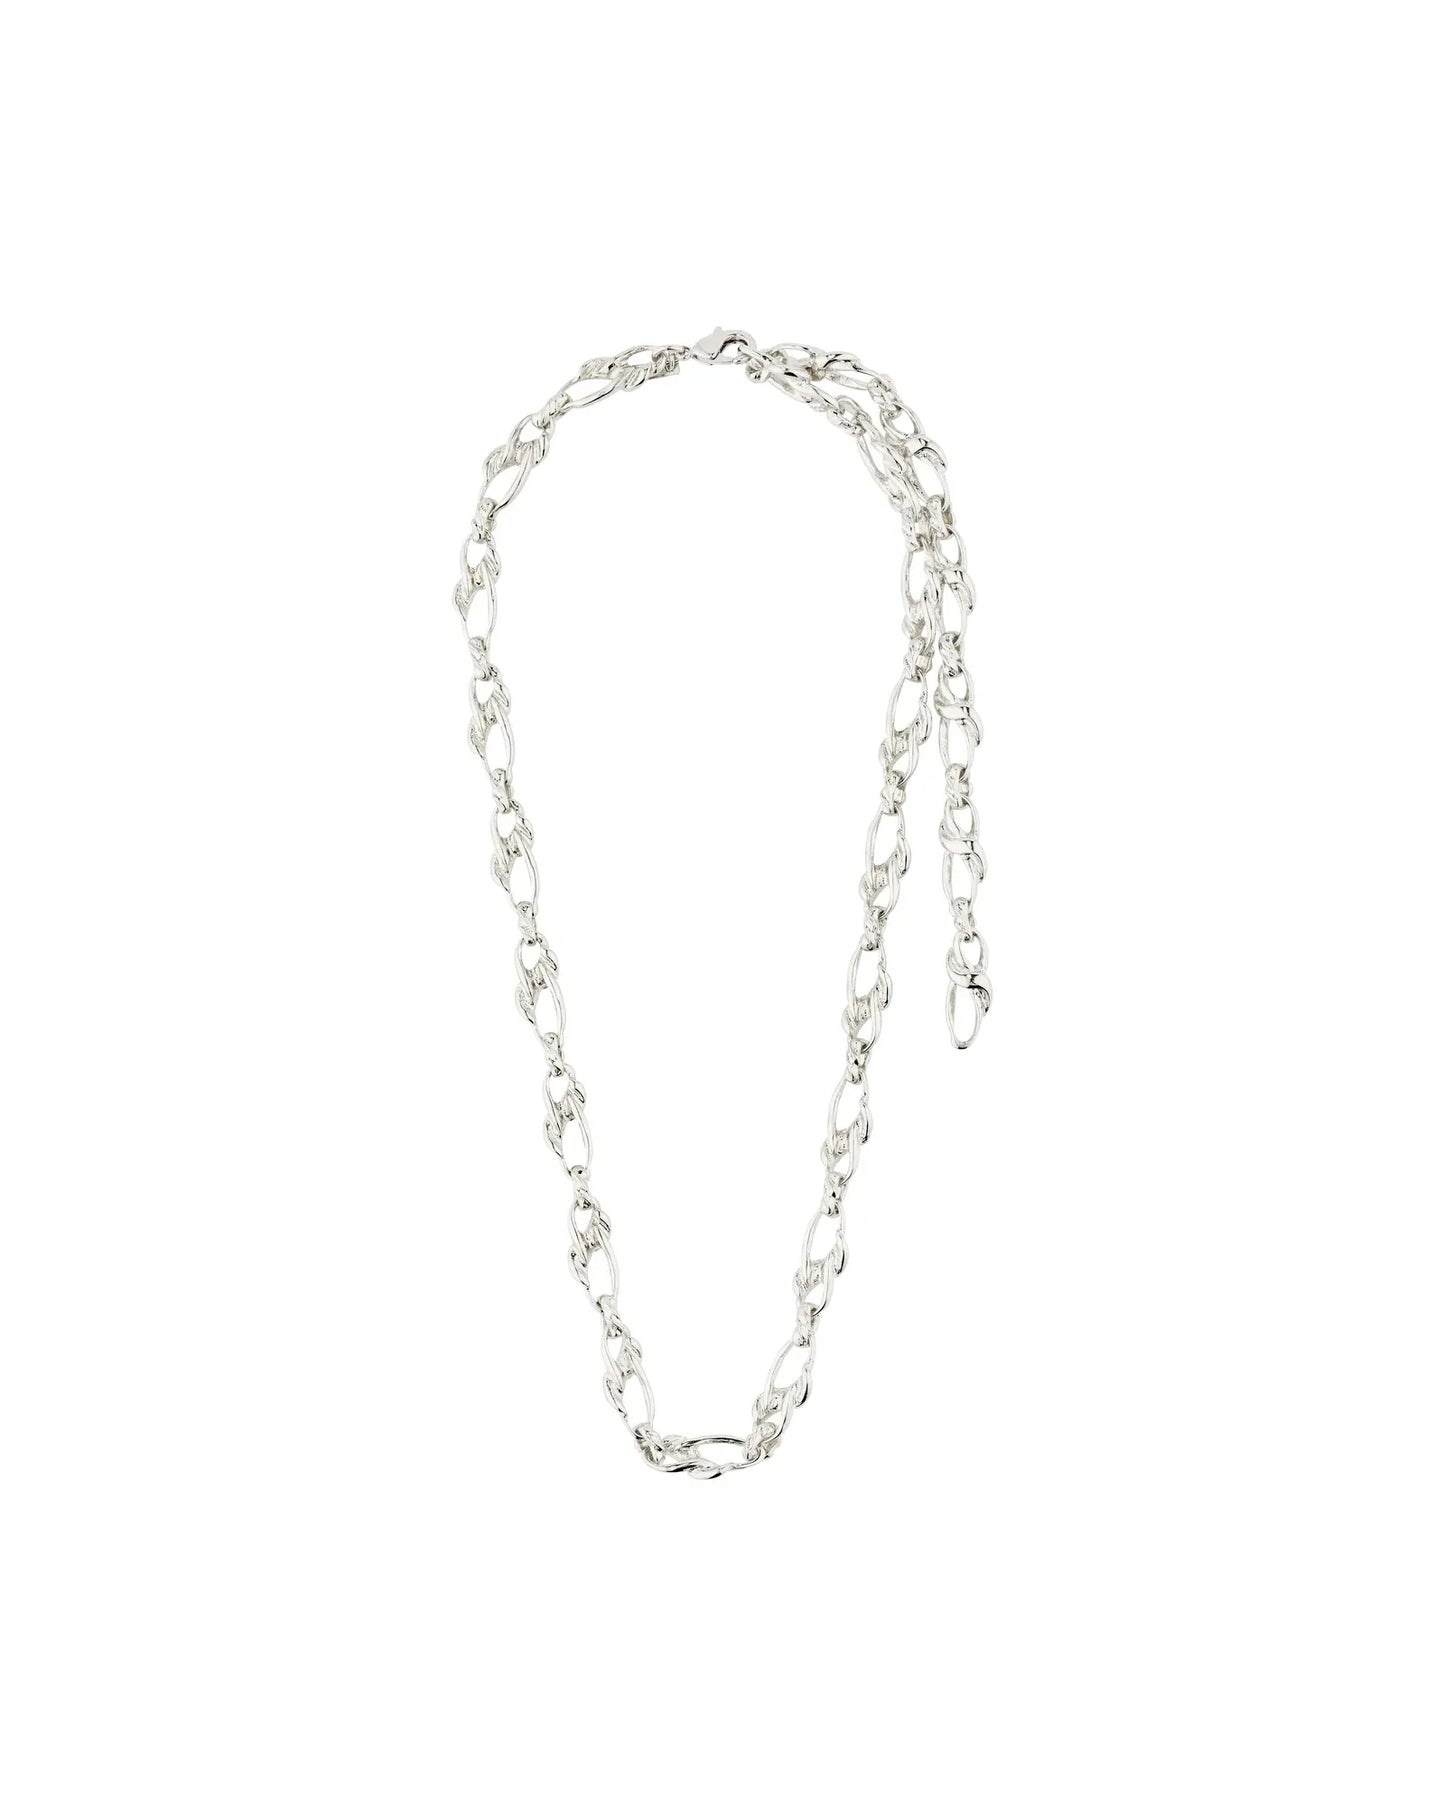 RANI Recycled Necklace - Silver Plated